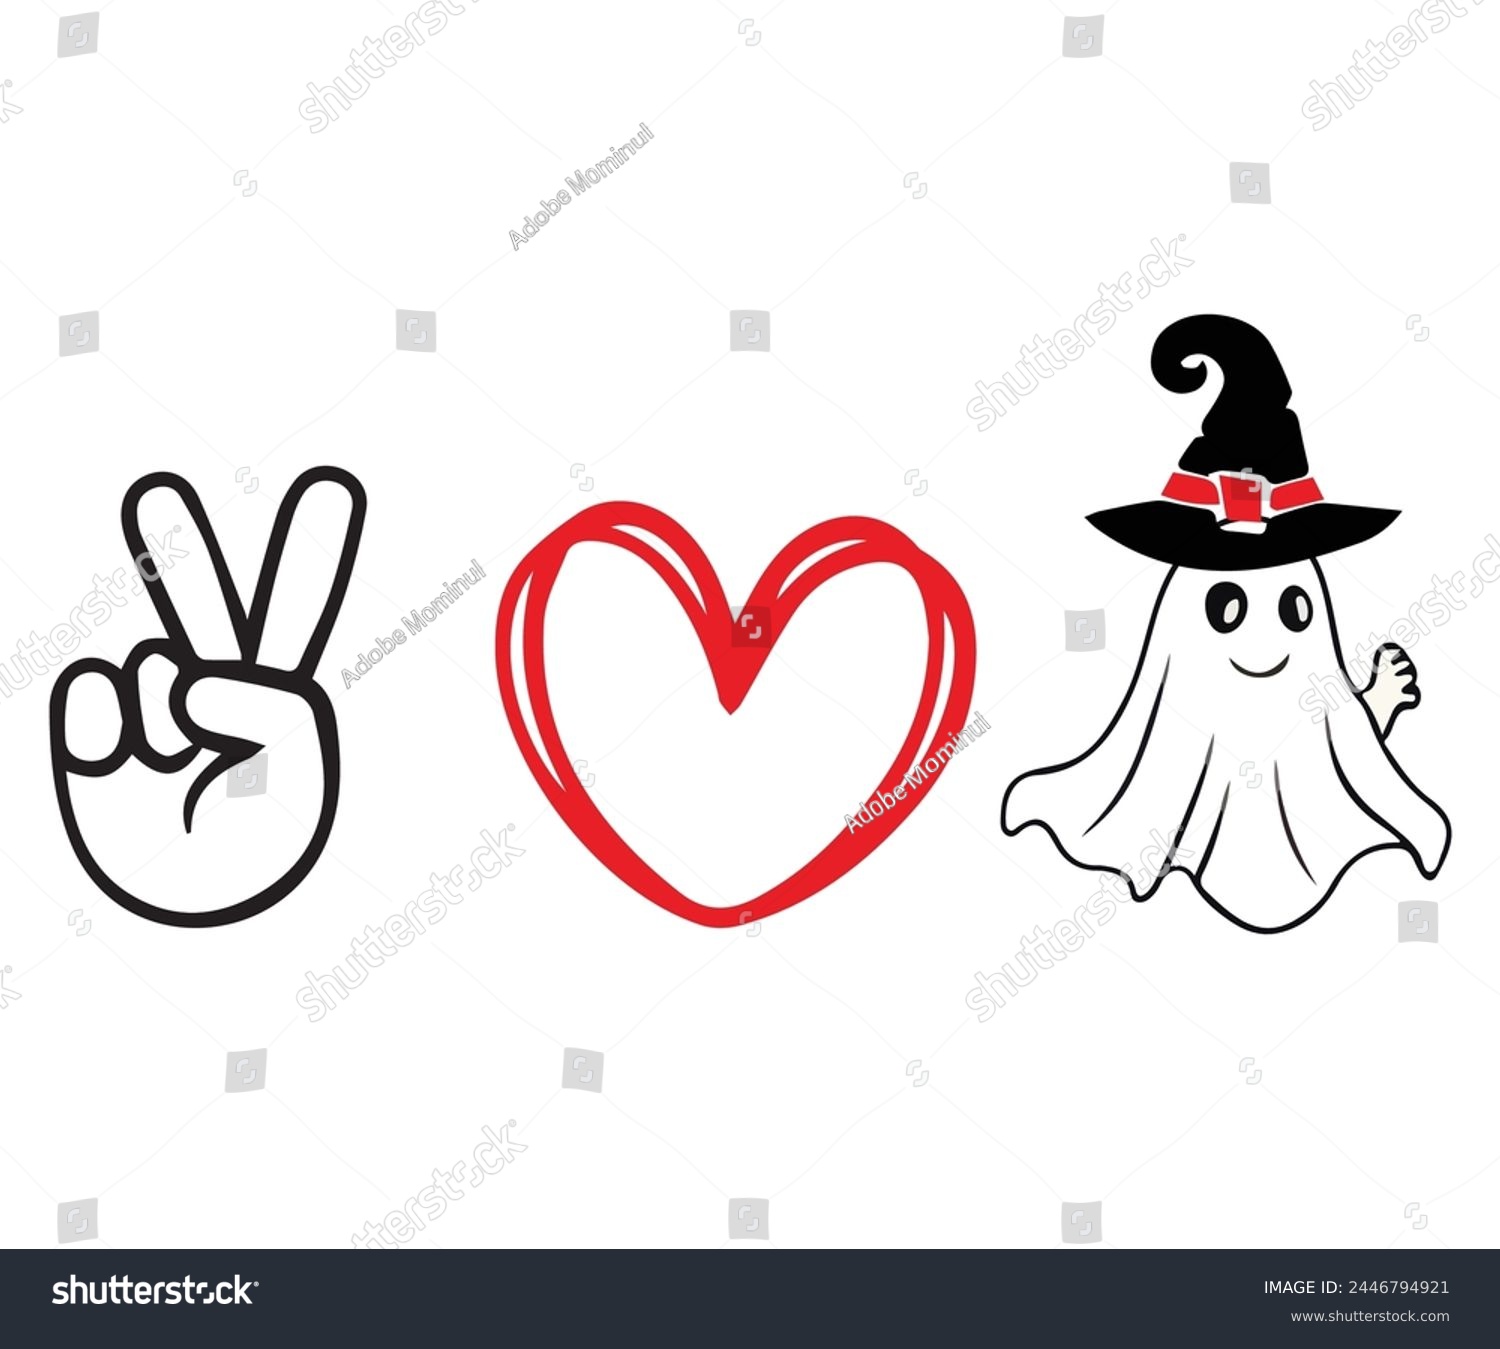 SVG of Peace Love Boo Halloween Svg,Typography,Halloween Quotes,Witches Svg,Halloween Party,Halloween Costume,Halloween Gift,Funny Halloween,Spooky Svg,Funny T shirt,Ghost Svg,Cut file svg